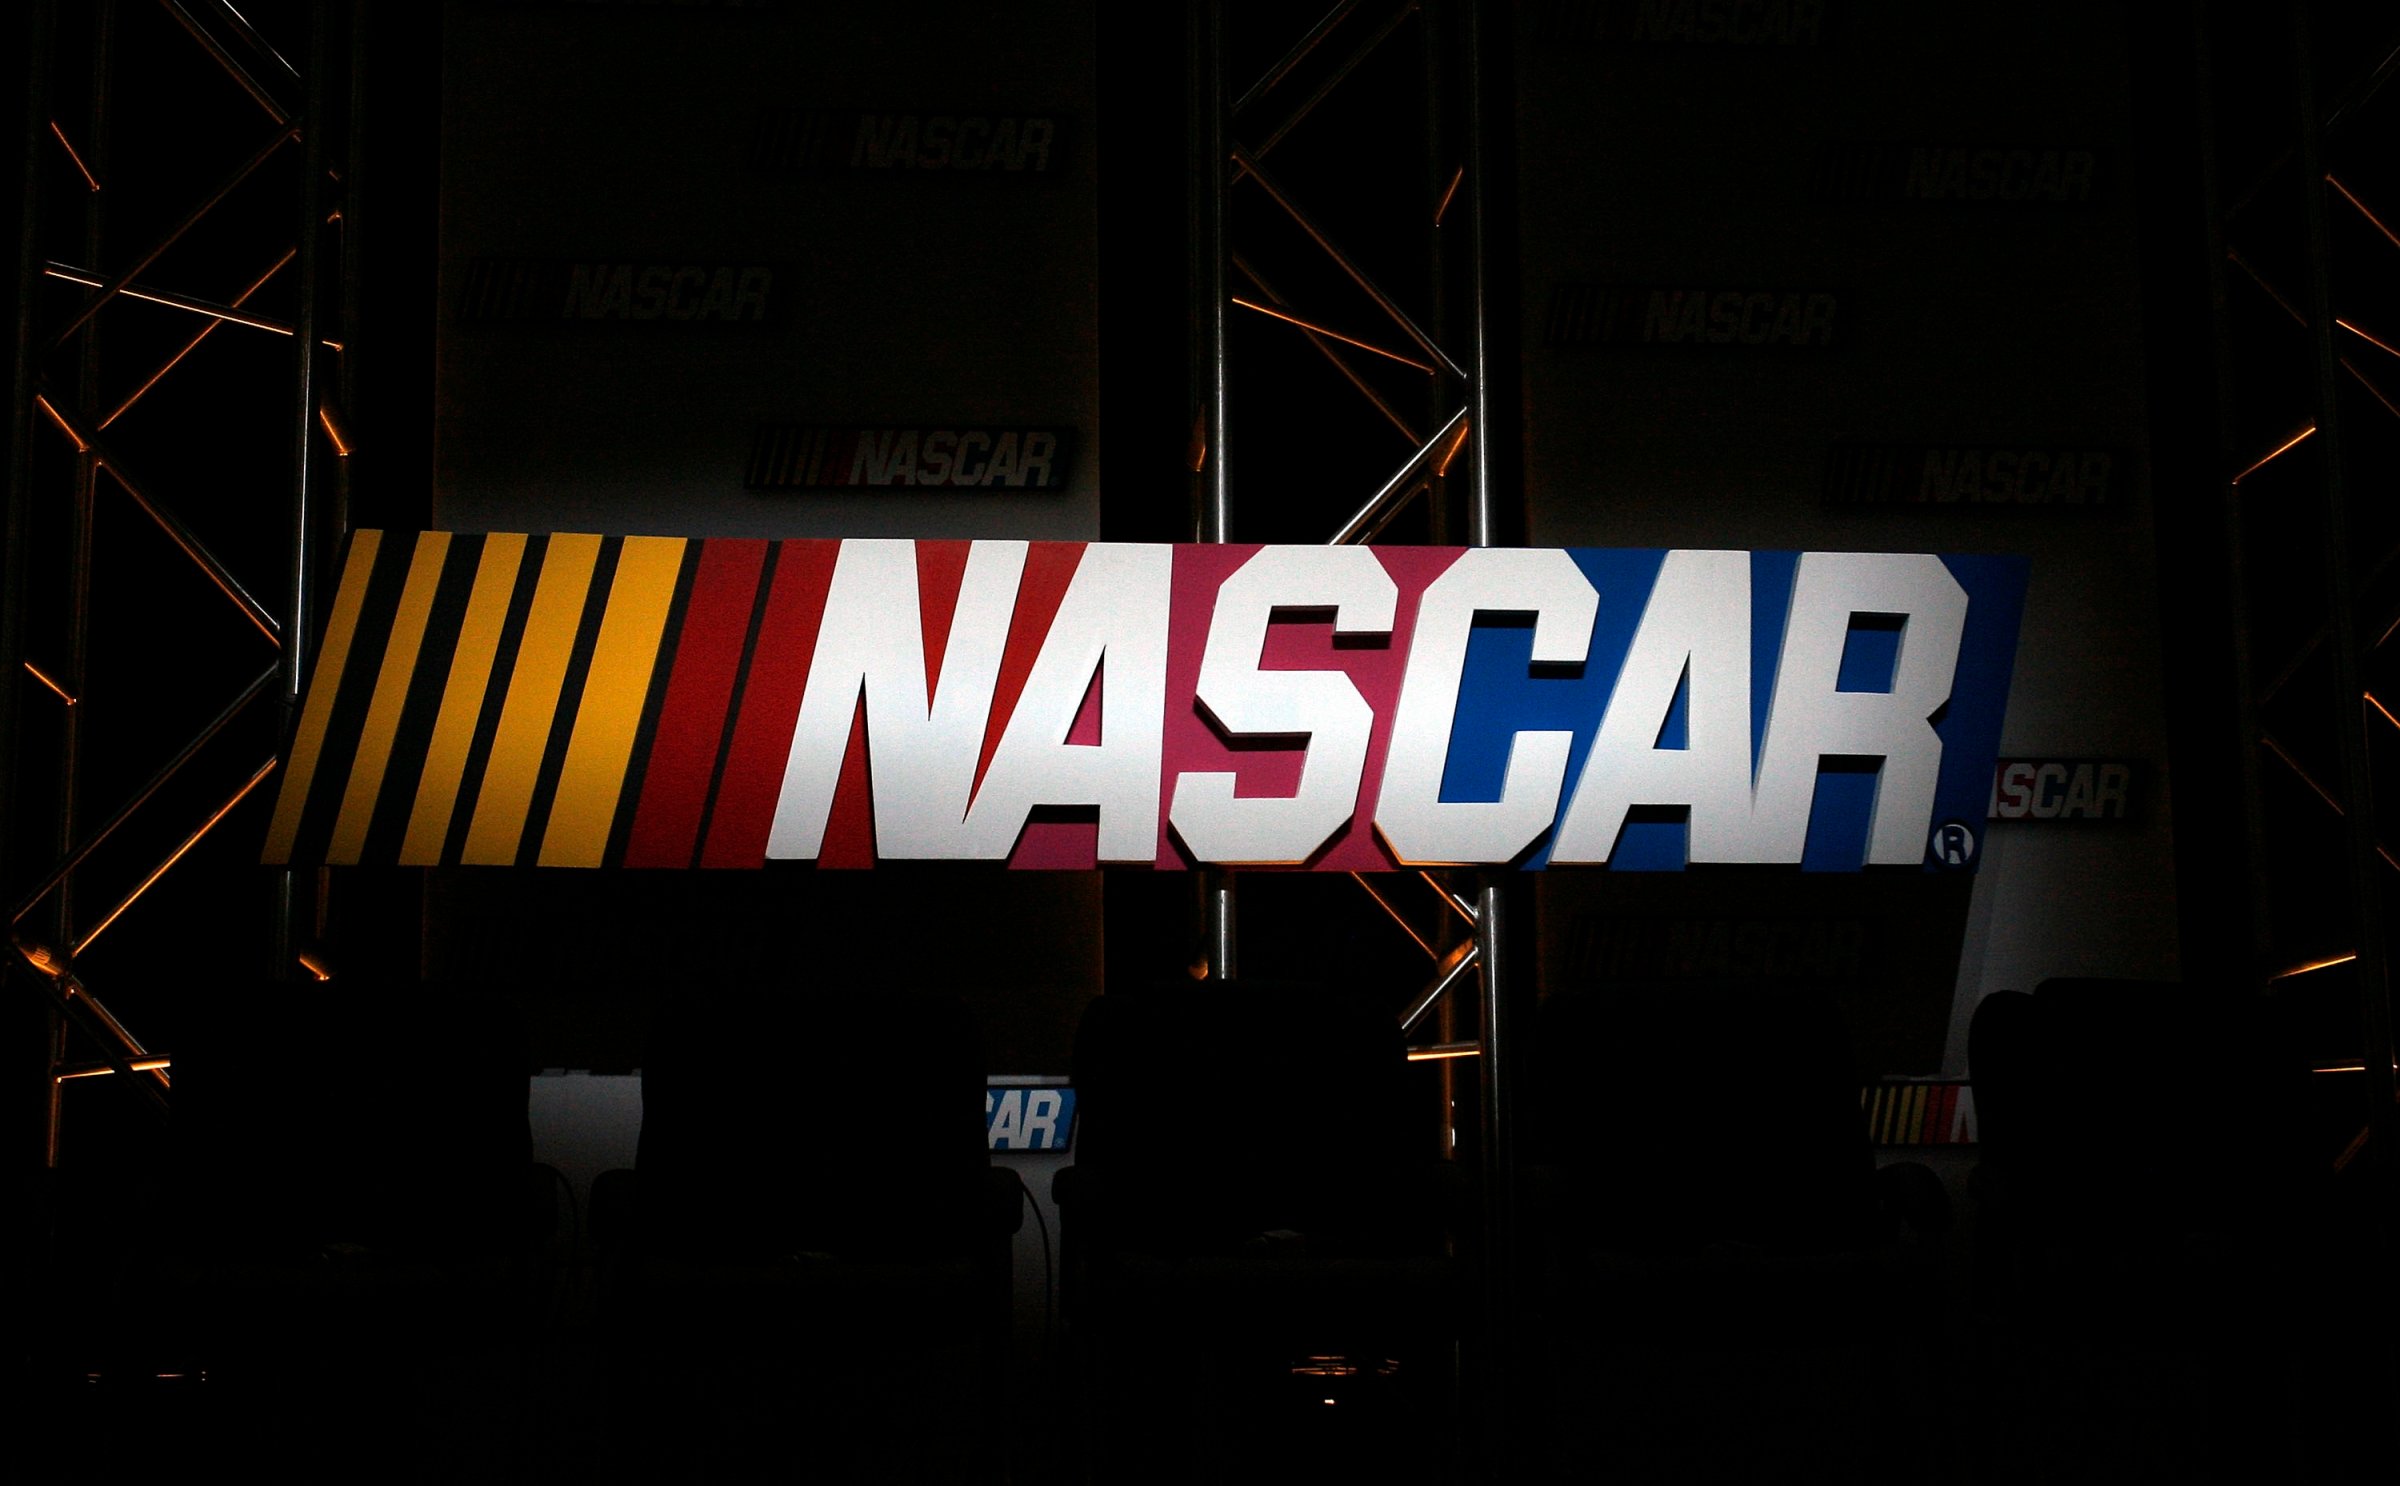 A general view of the NASCAR logo displayed during the NASCAR Sprint Media Tour hosted by Lowe's Motor Speedway at the NASCAR Research and Development Center January 22, 2009 in Concord, North Carolina.